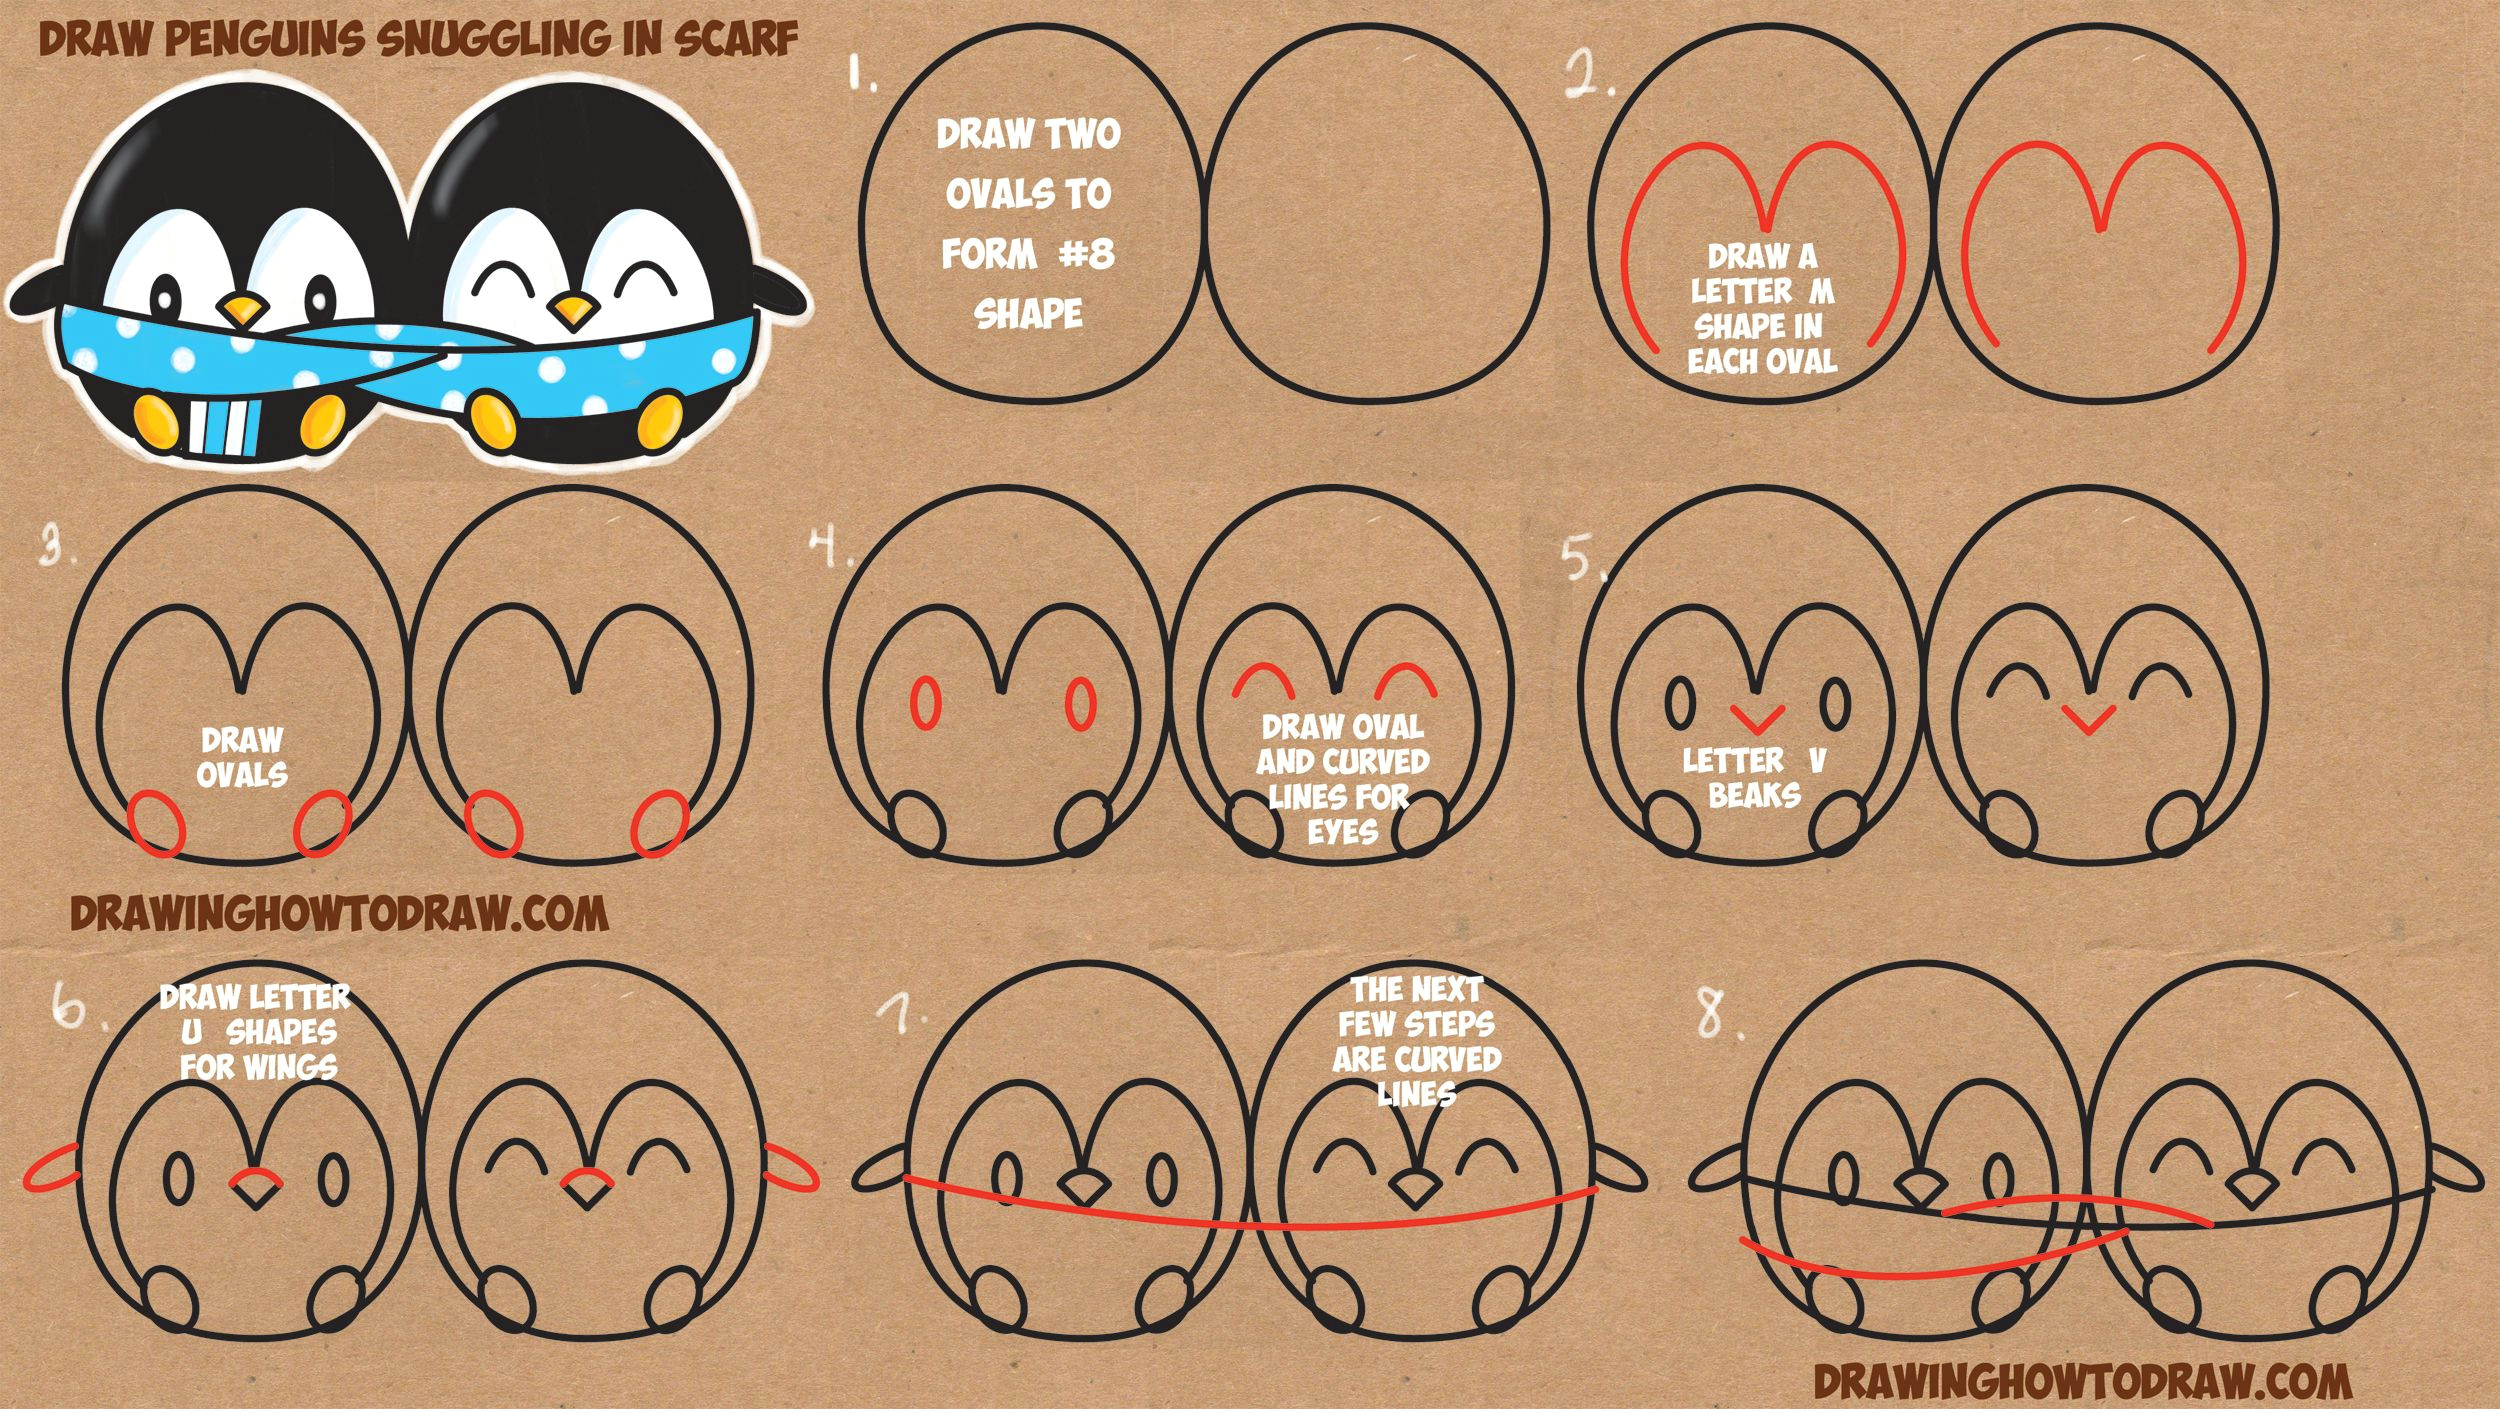 V Cute Drawing How to Draw Cute Kawaii Chibi Cartoon Penguins In A Scarf for